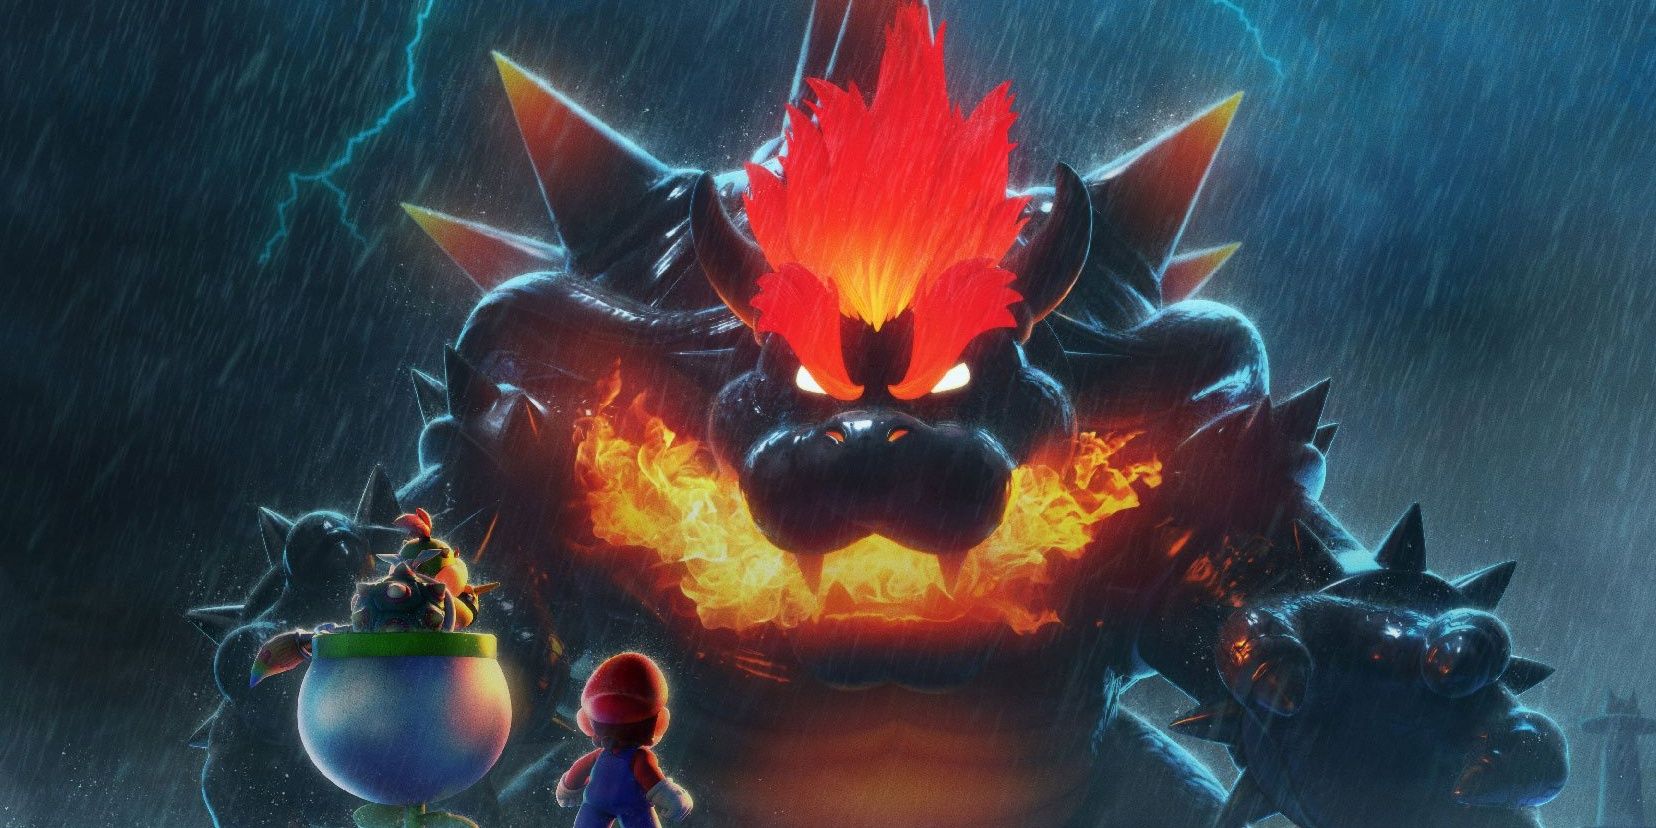 giant bowser in bowser's fury